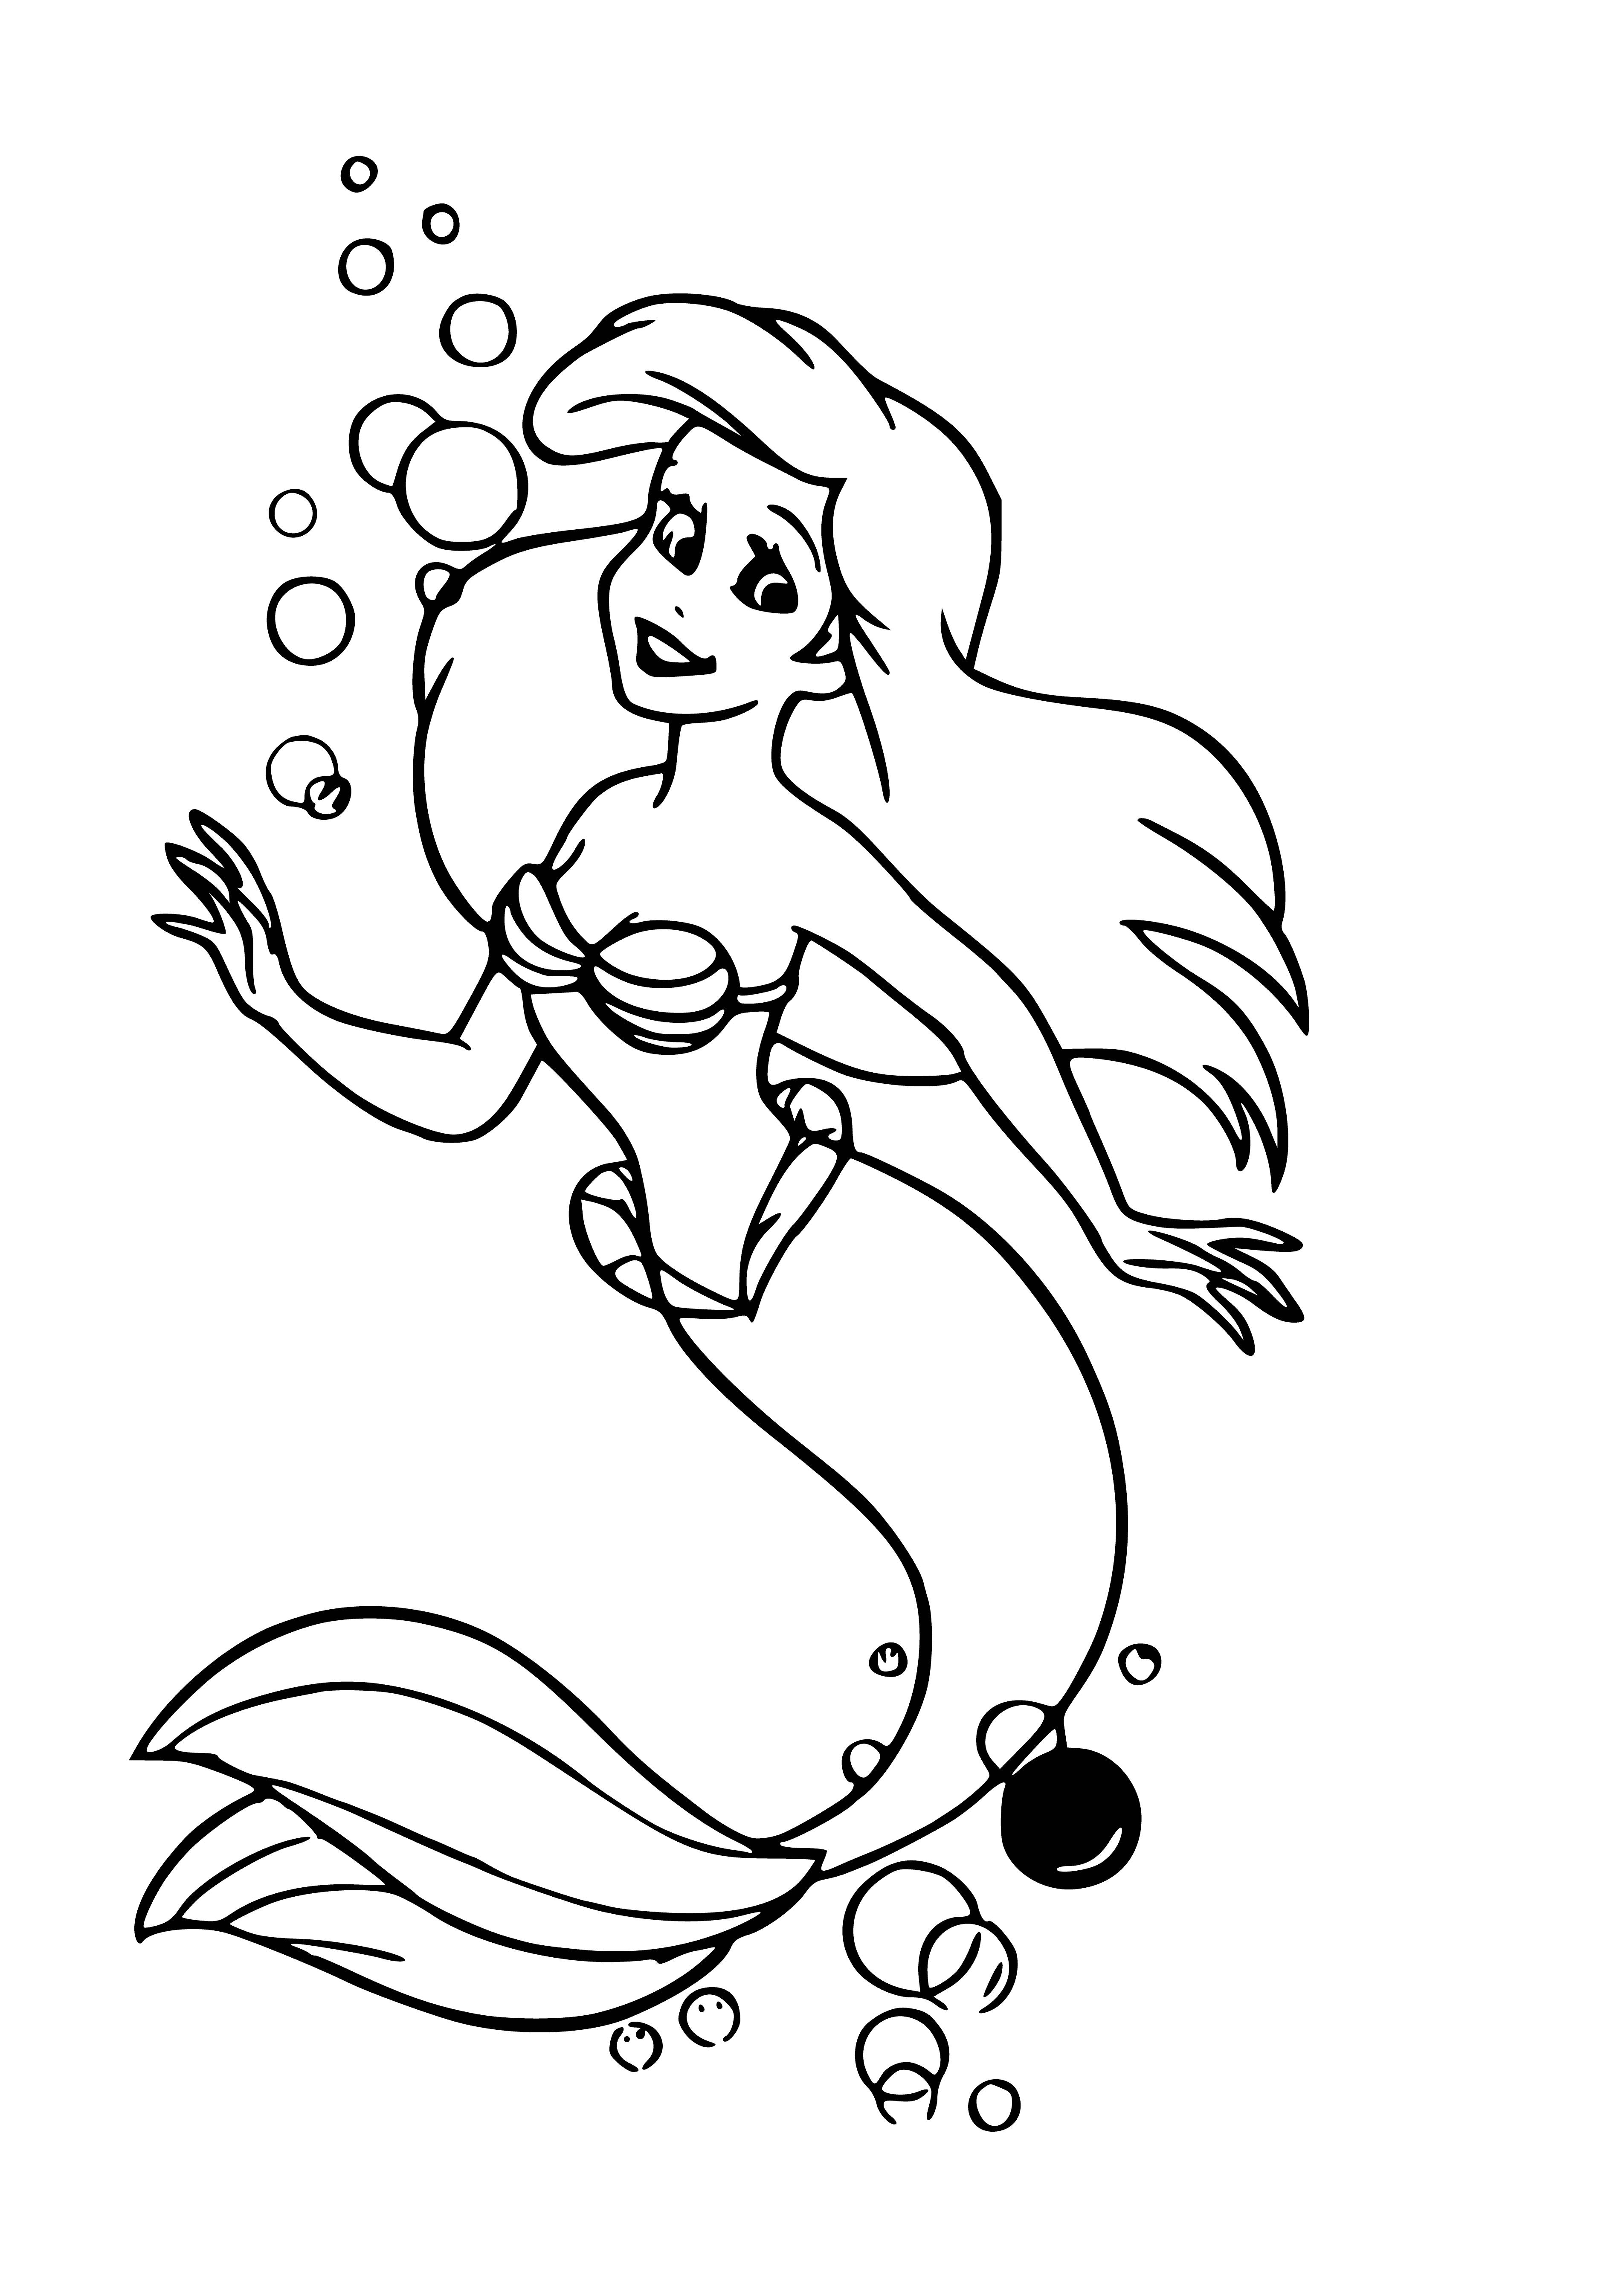 coloring page: Mermaid in center of coloring page listens to conch shell with curious expression; deep blue ocean + light blue sky, white clouds, and distant ship.